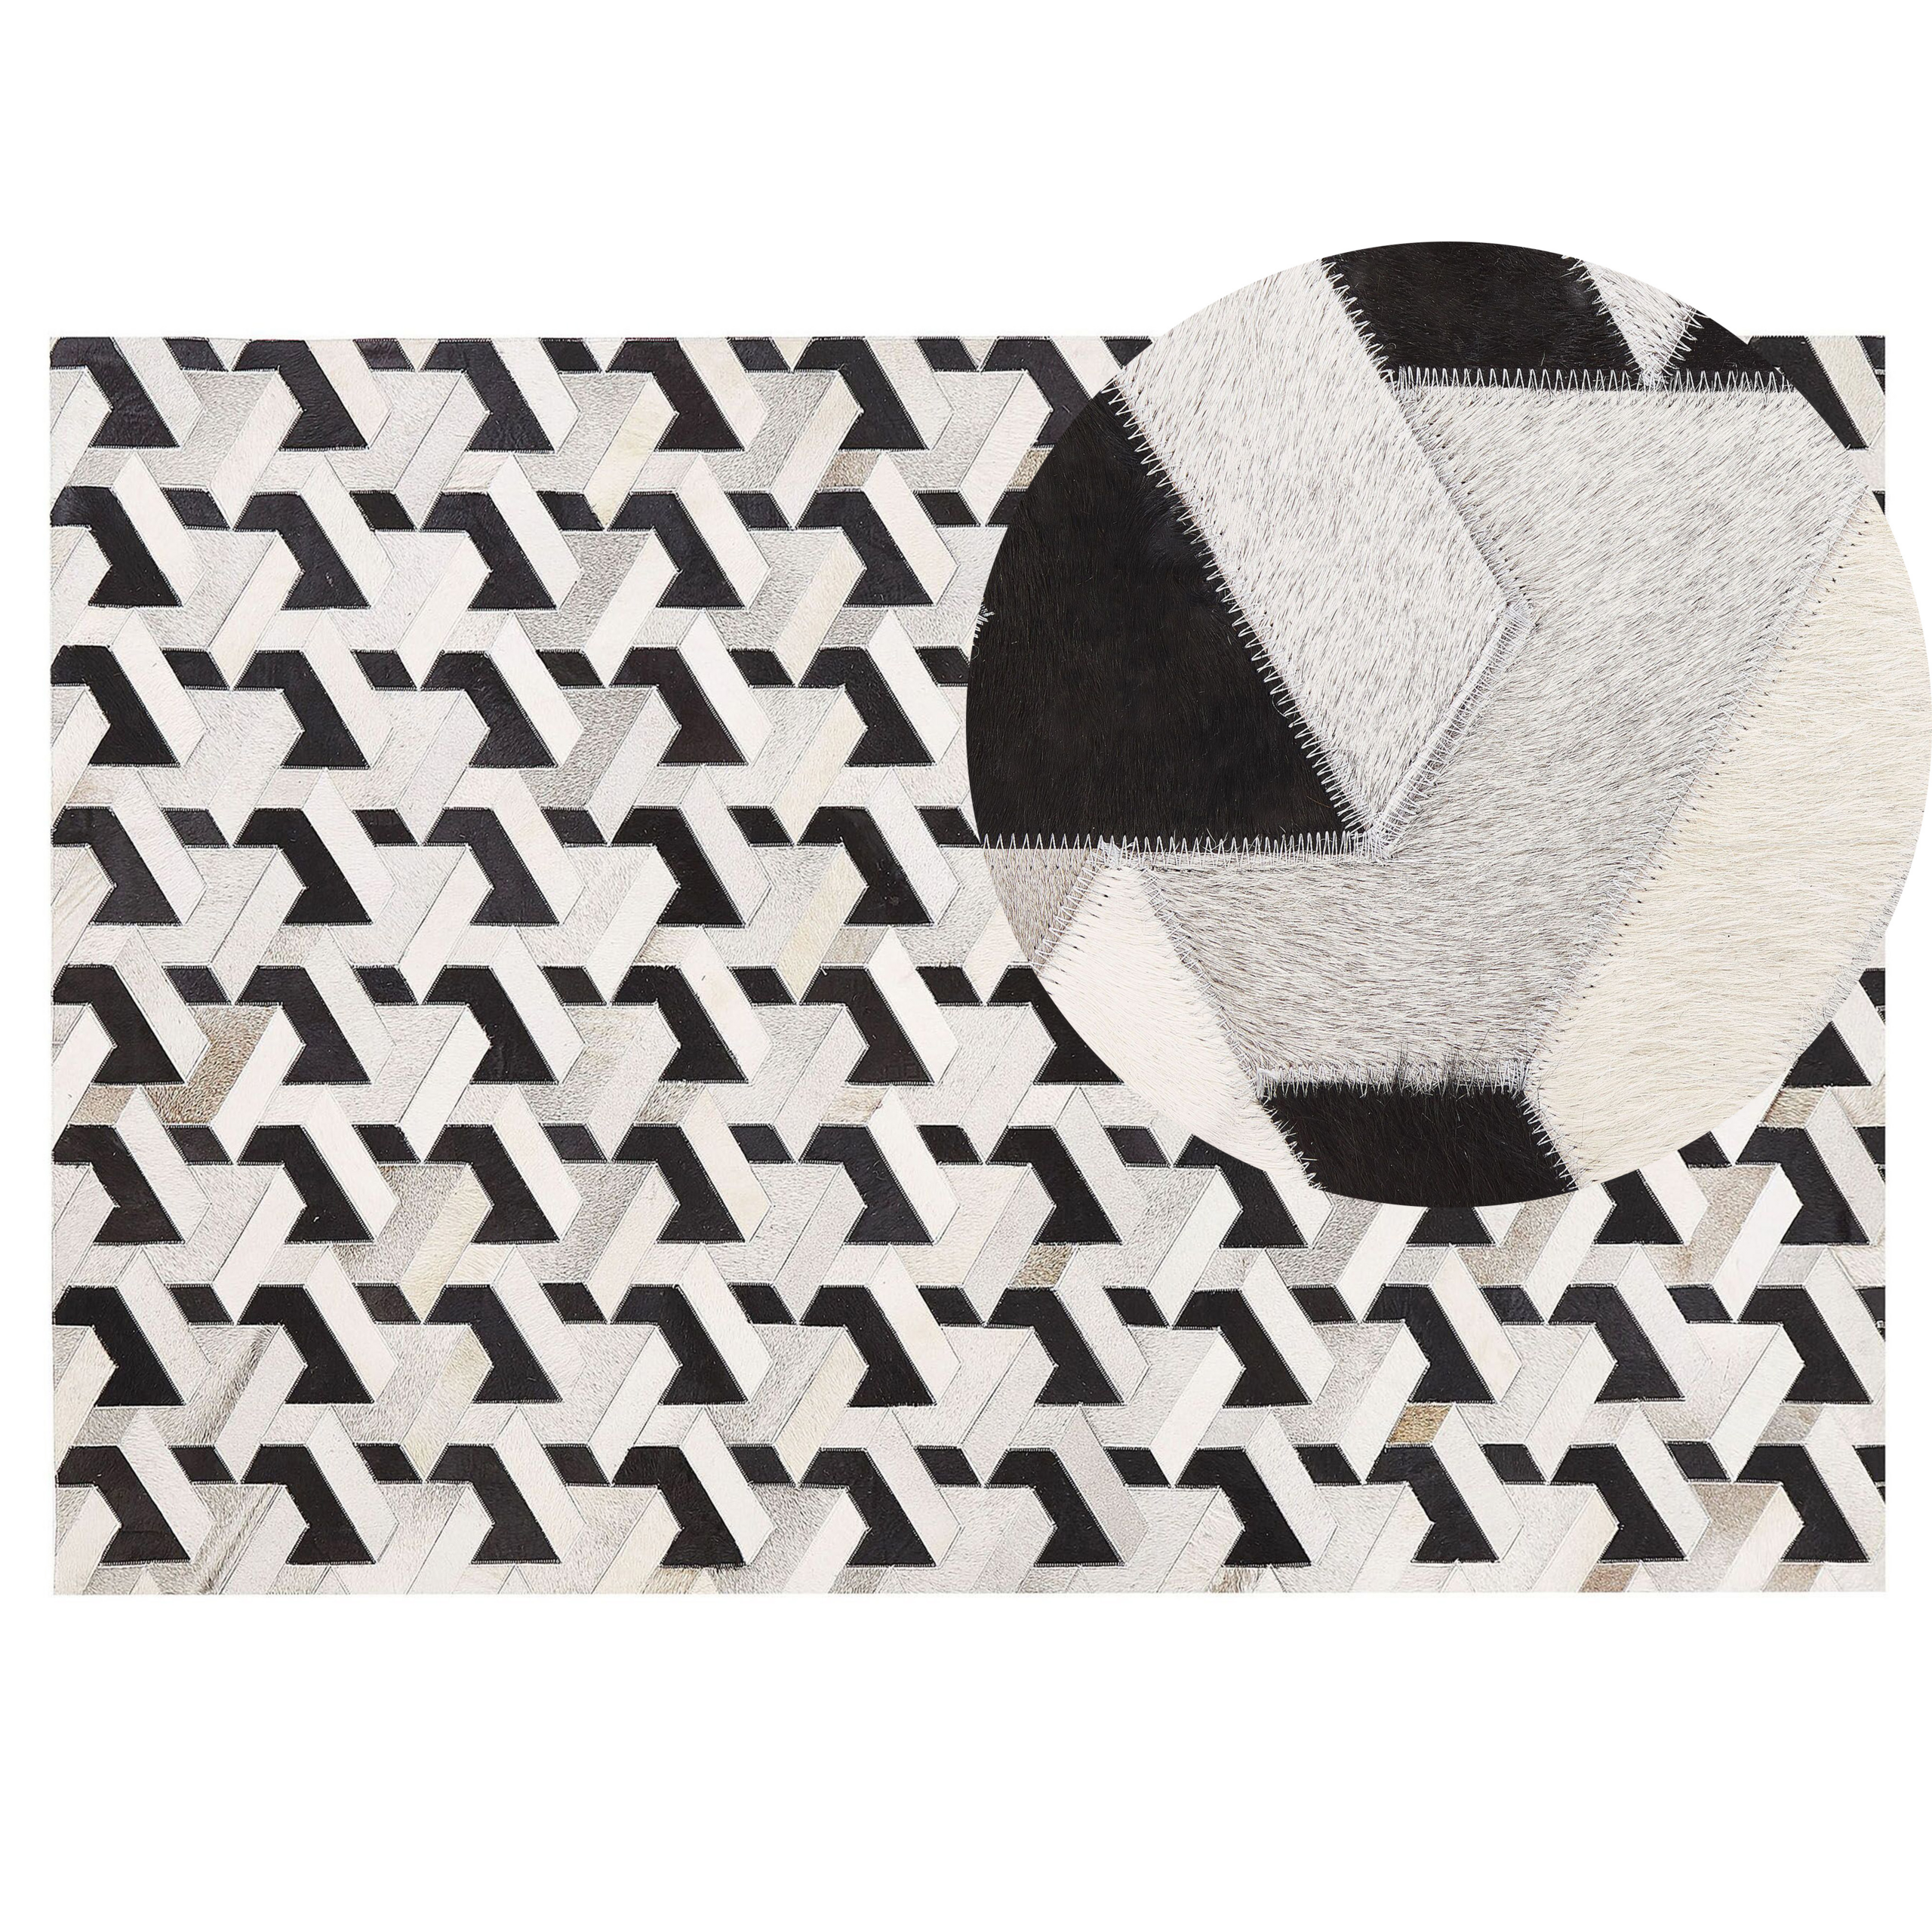 Beliani Area Rug Black and White Cowhide Leather 140 x 200 cm Geometric Pattern Patchwork